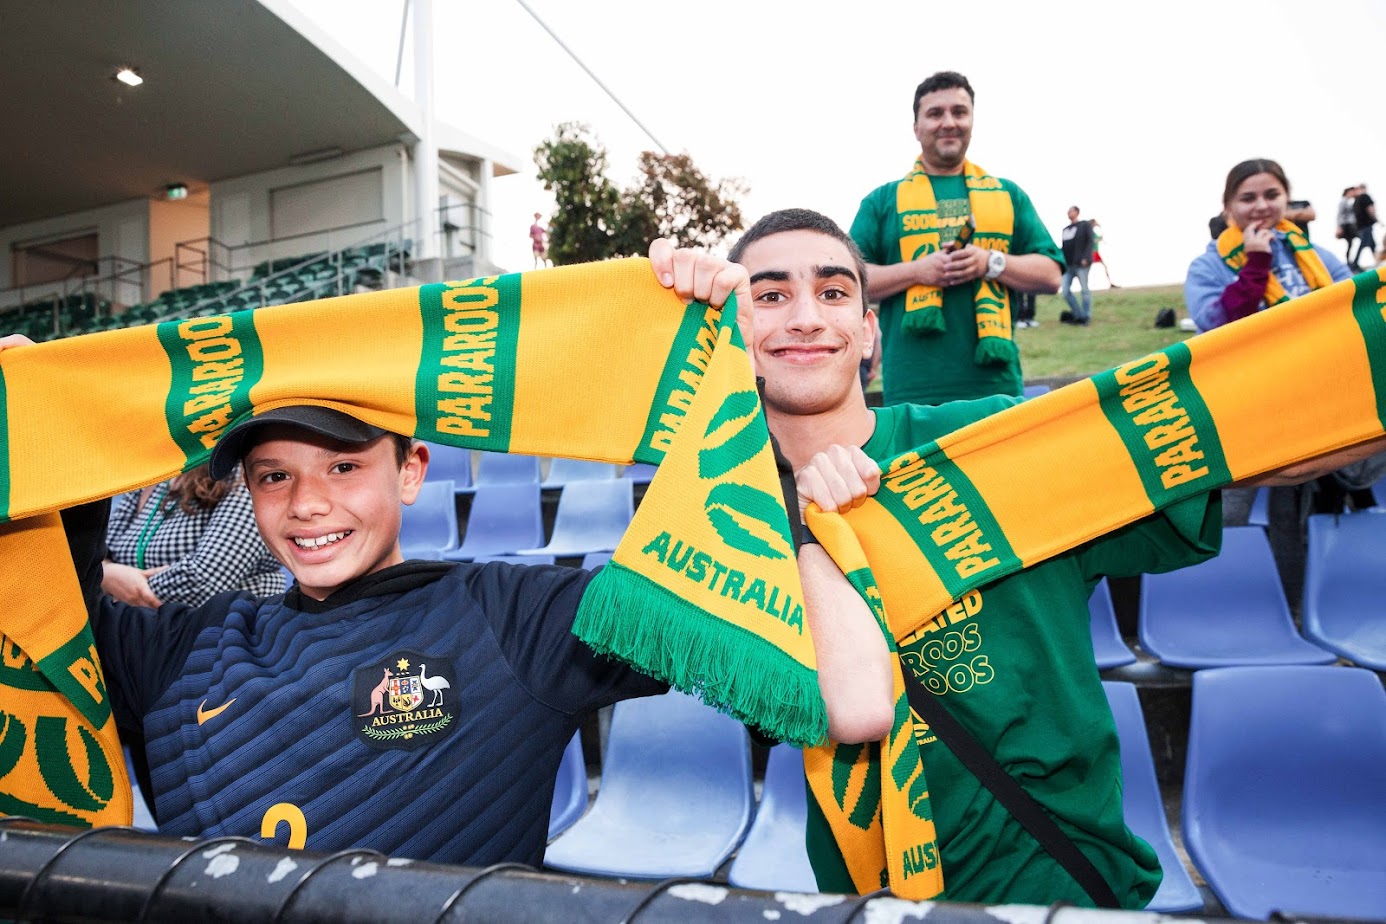 A 13-year-old Kaylan Van Heer (left) holds up a Pararoos scarf in the stands of Cromer Park, Sydney during Pararoos v Canada. A second person alongside him also holds up a scarf.